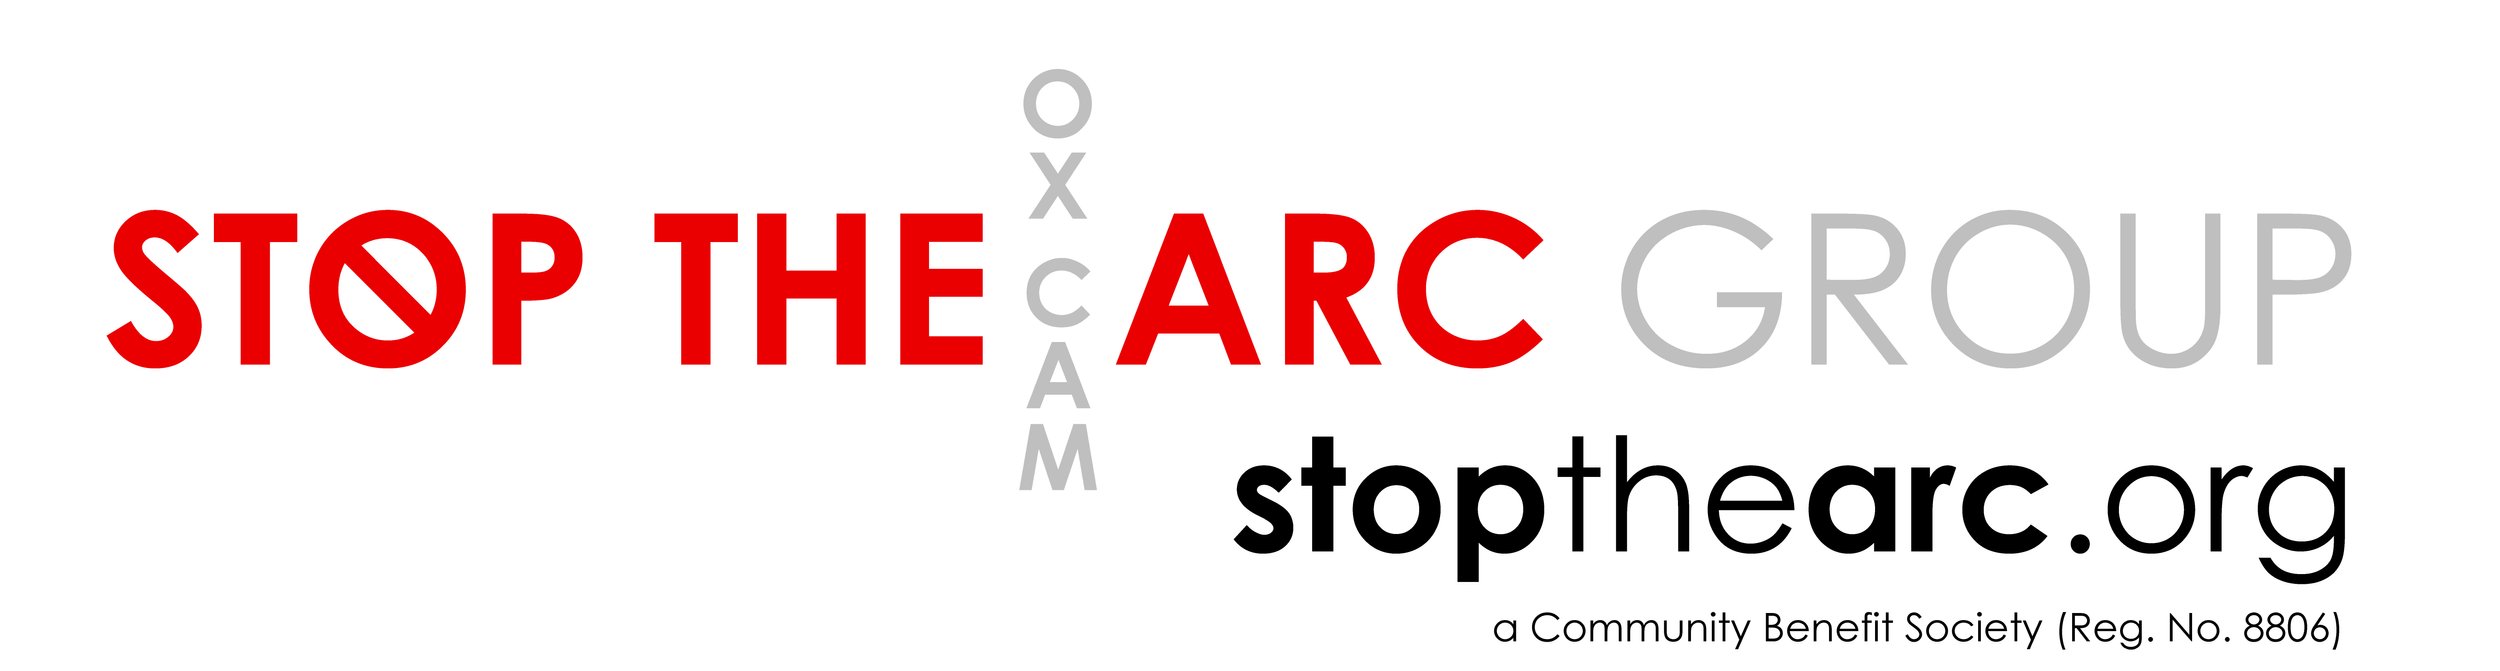 Stop the Arc Group